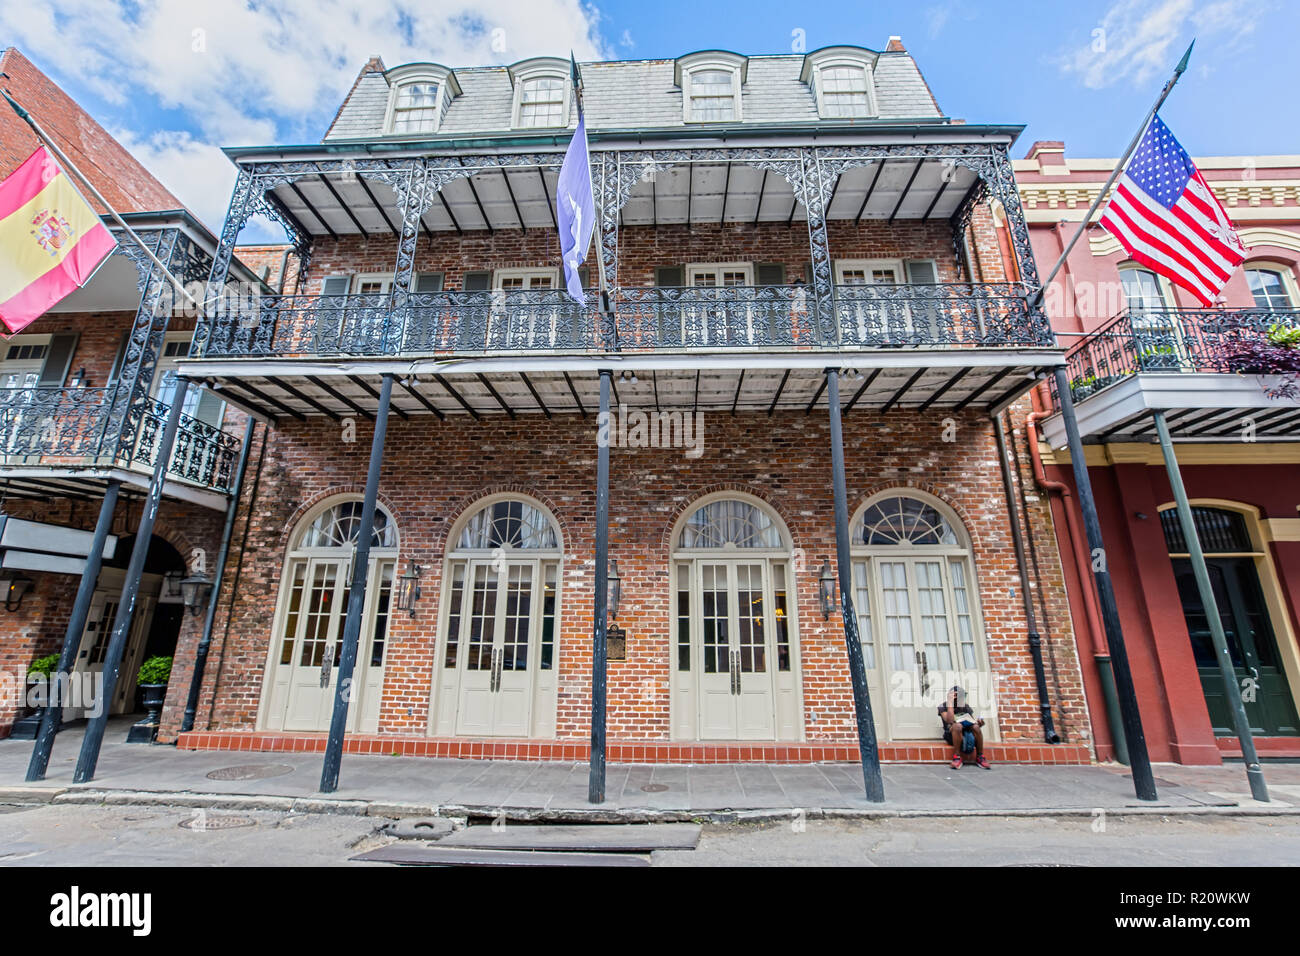 Impression of the French Quarter in New Orleans, LA Stock Photo